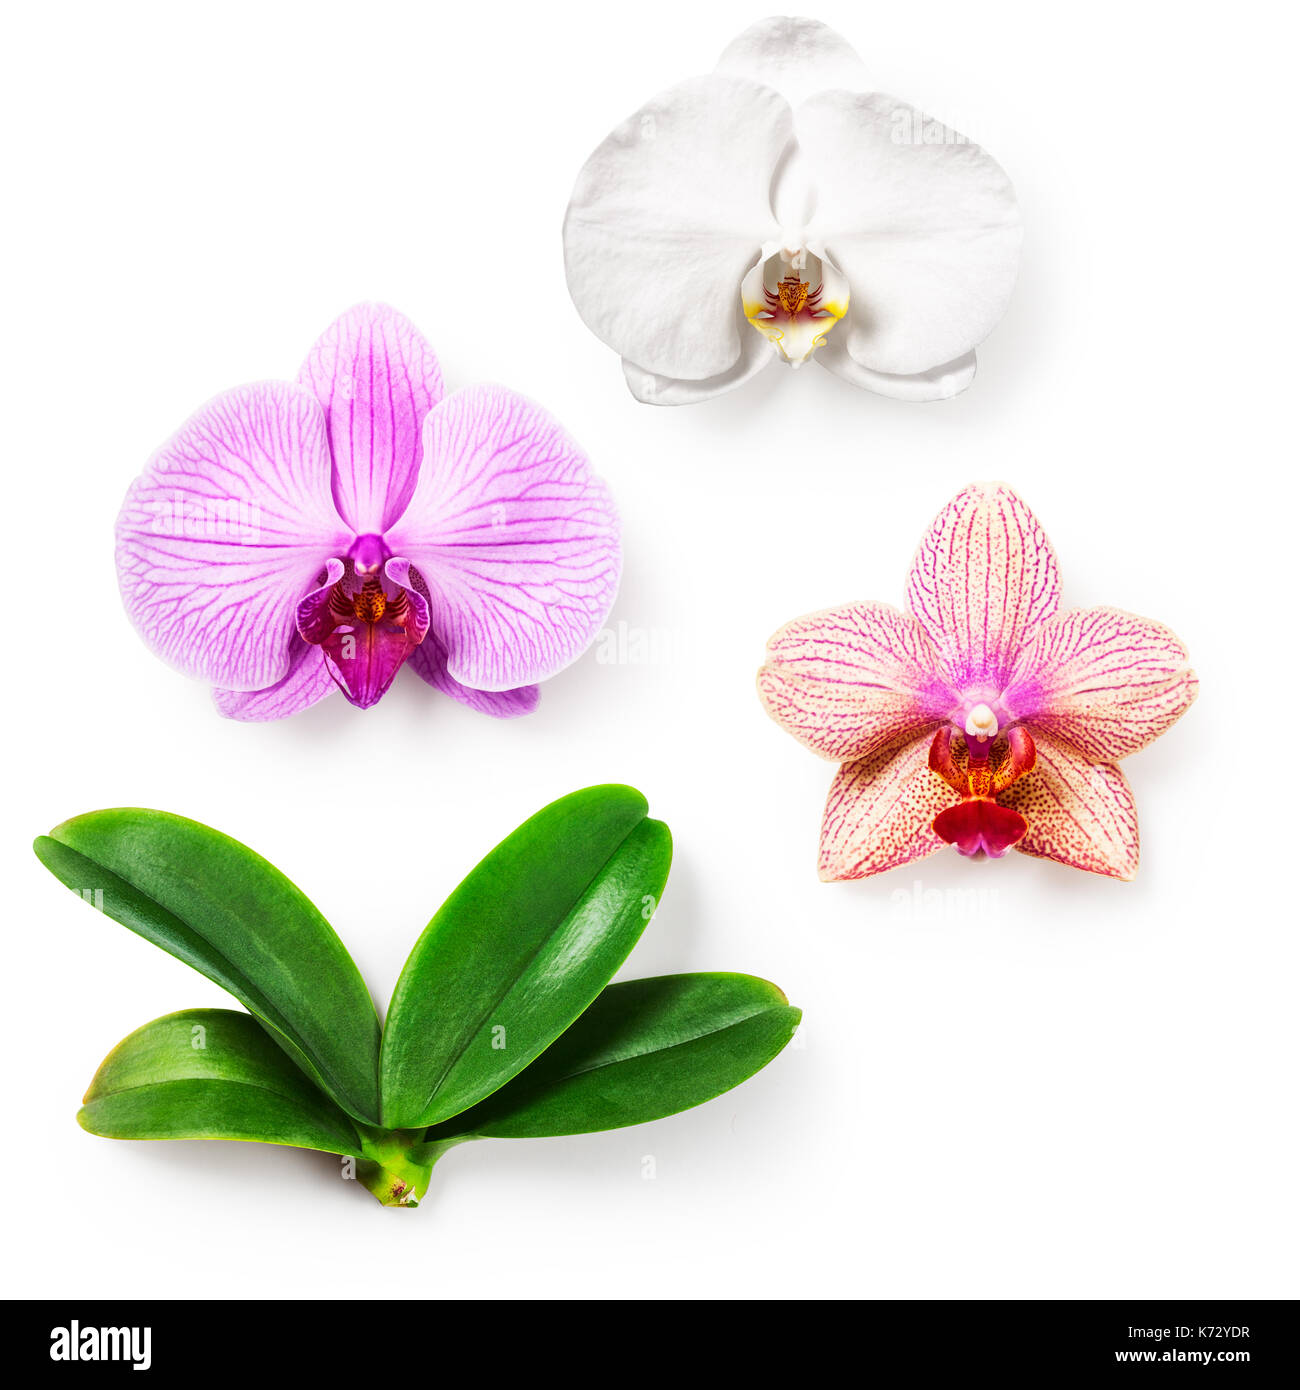 https://c8.alamy.com/comp/K72YDR/orchid-flowers-and-leaves-collection-isolated-on-white-background-K72YDR.jpg